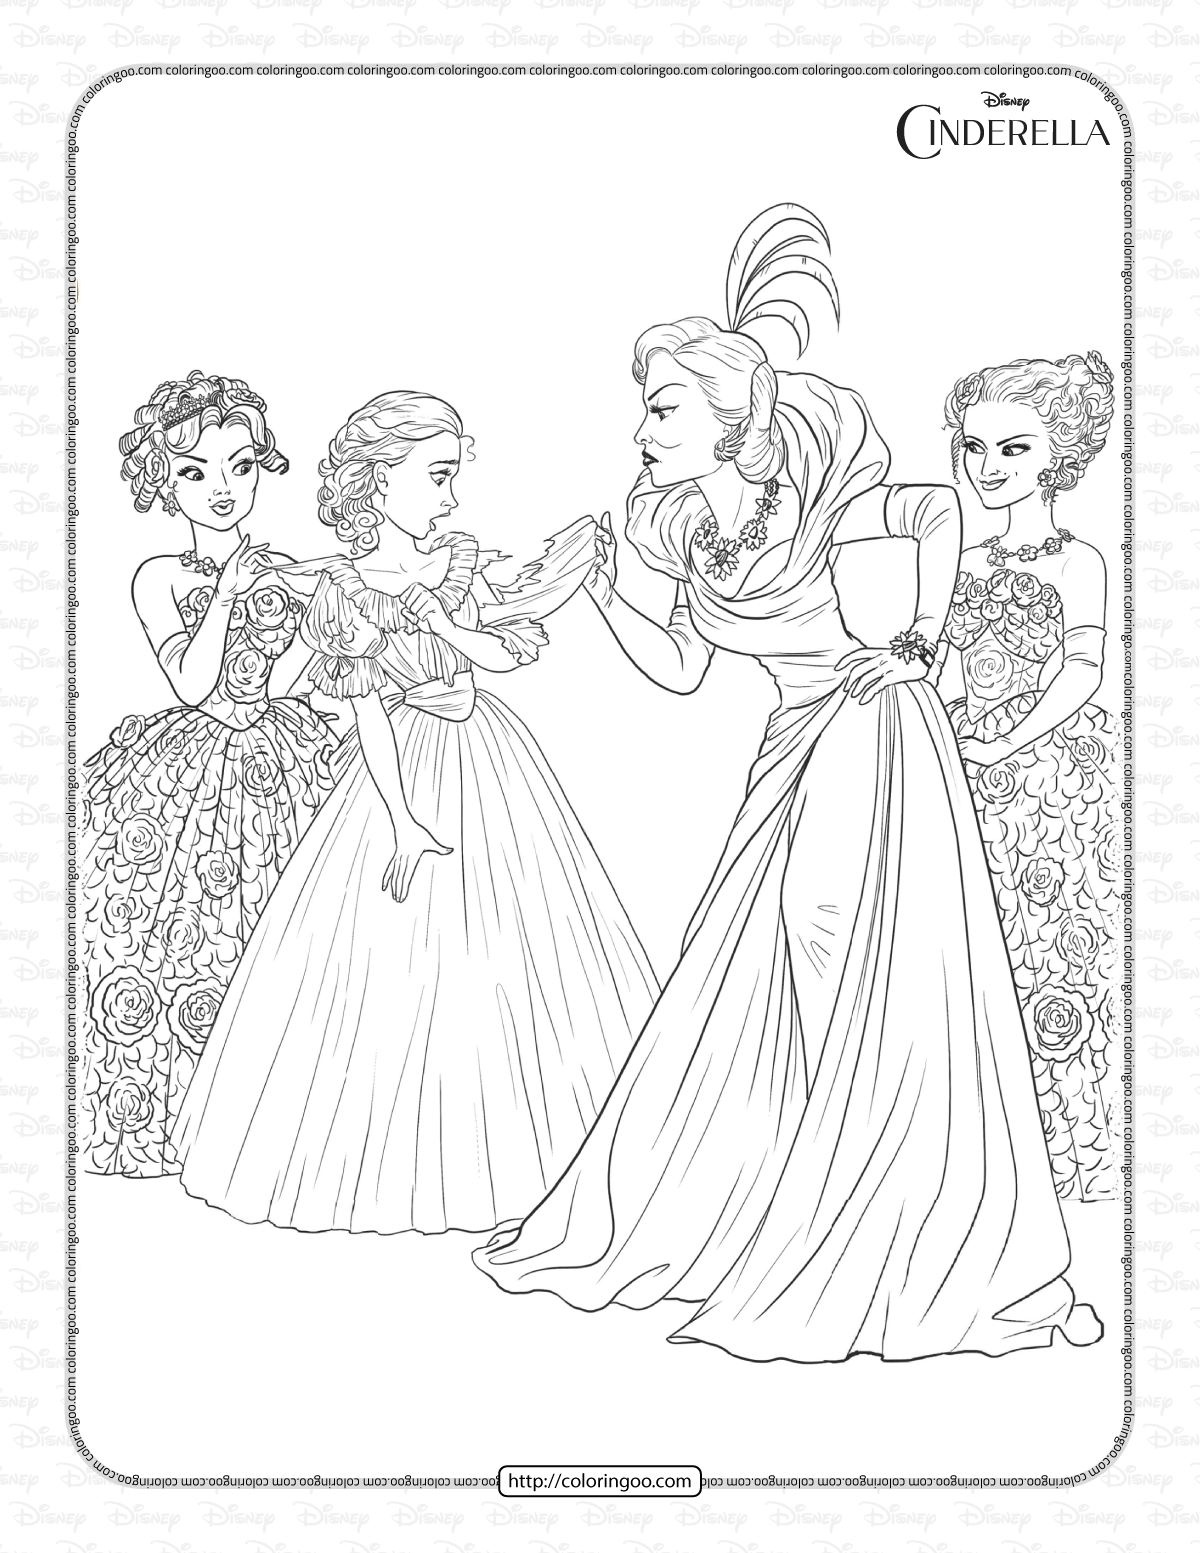 cinderellas wicked stepmother coloring page